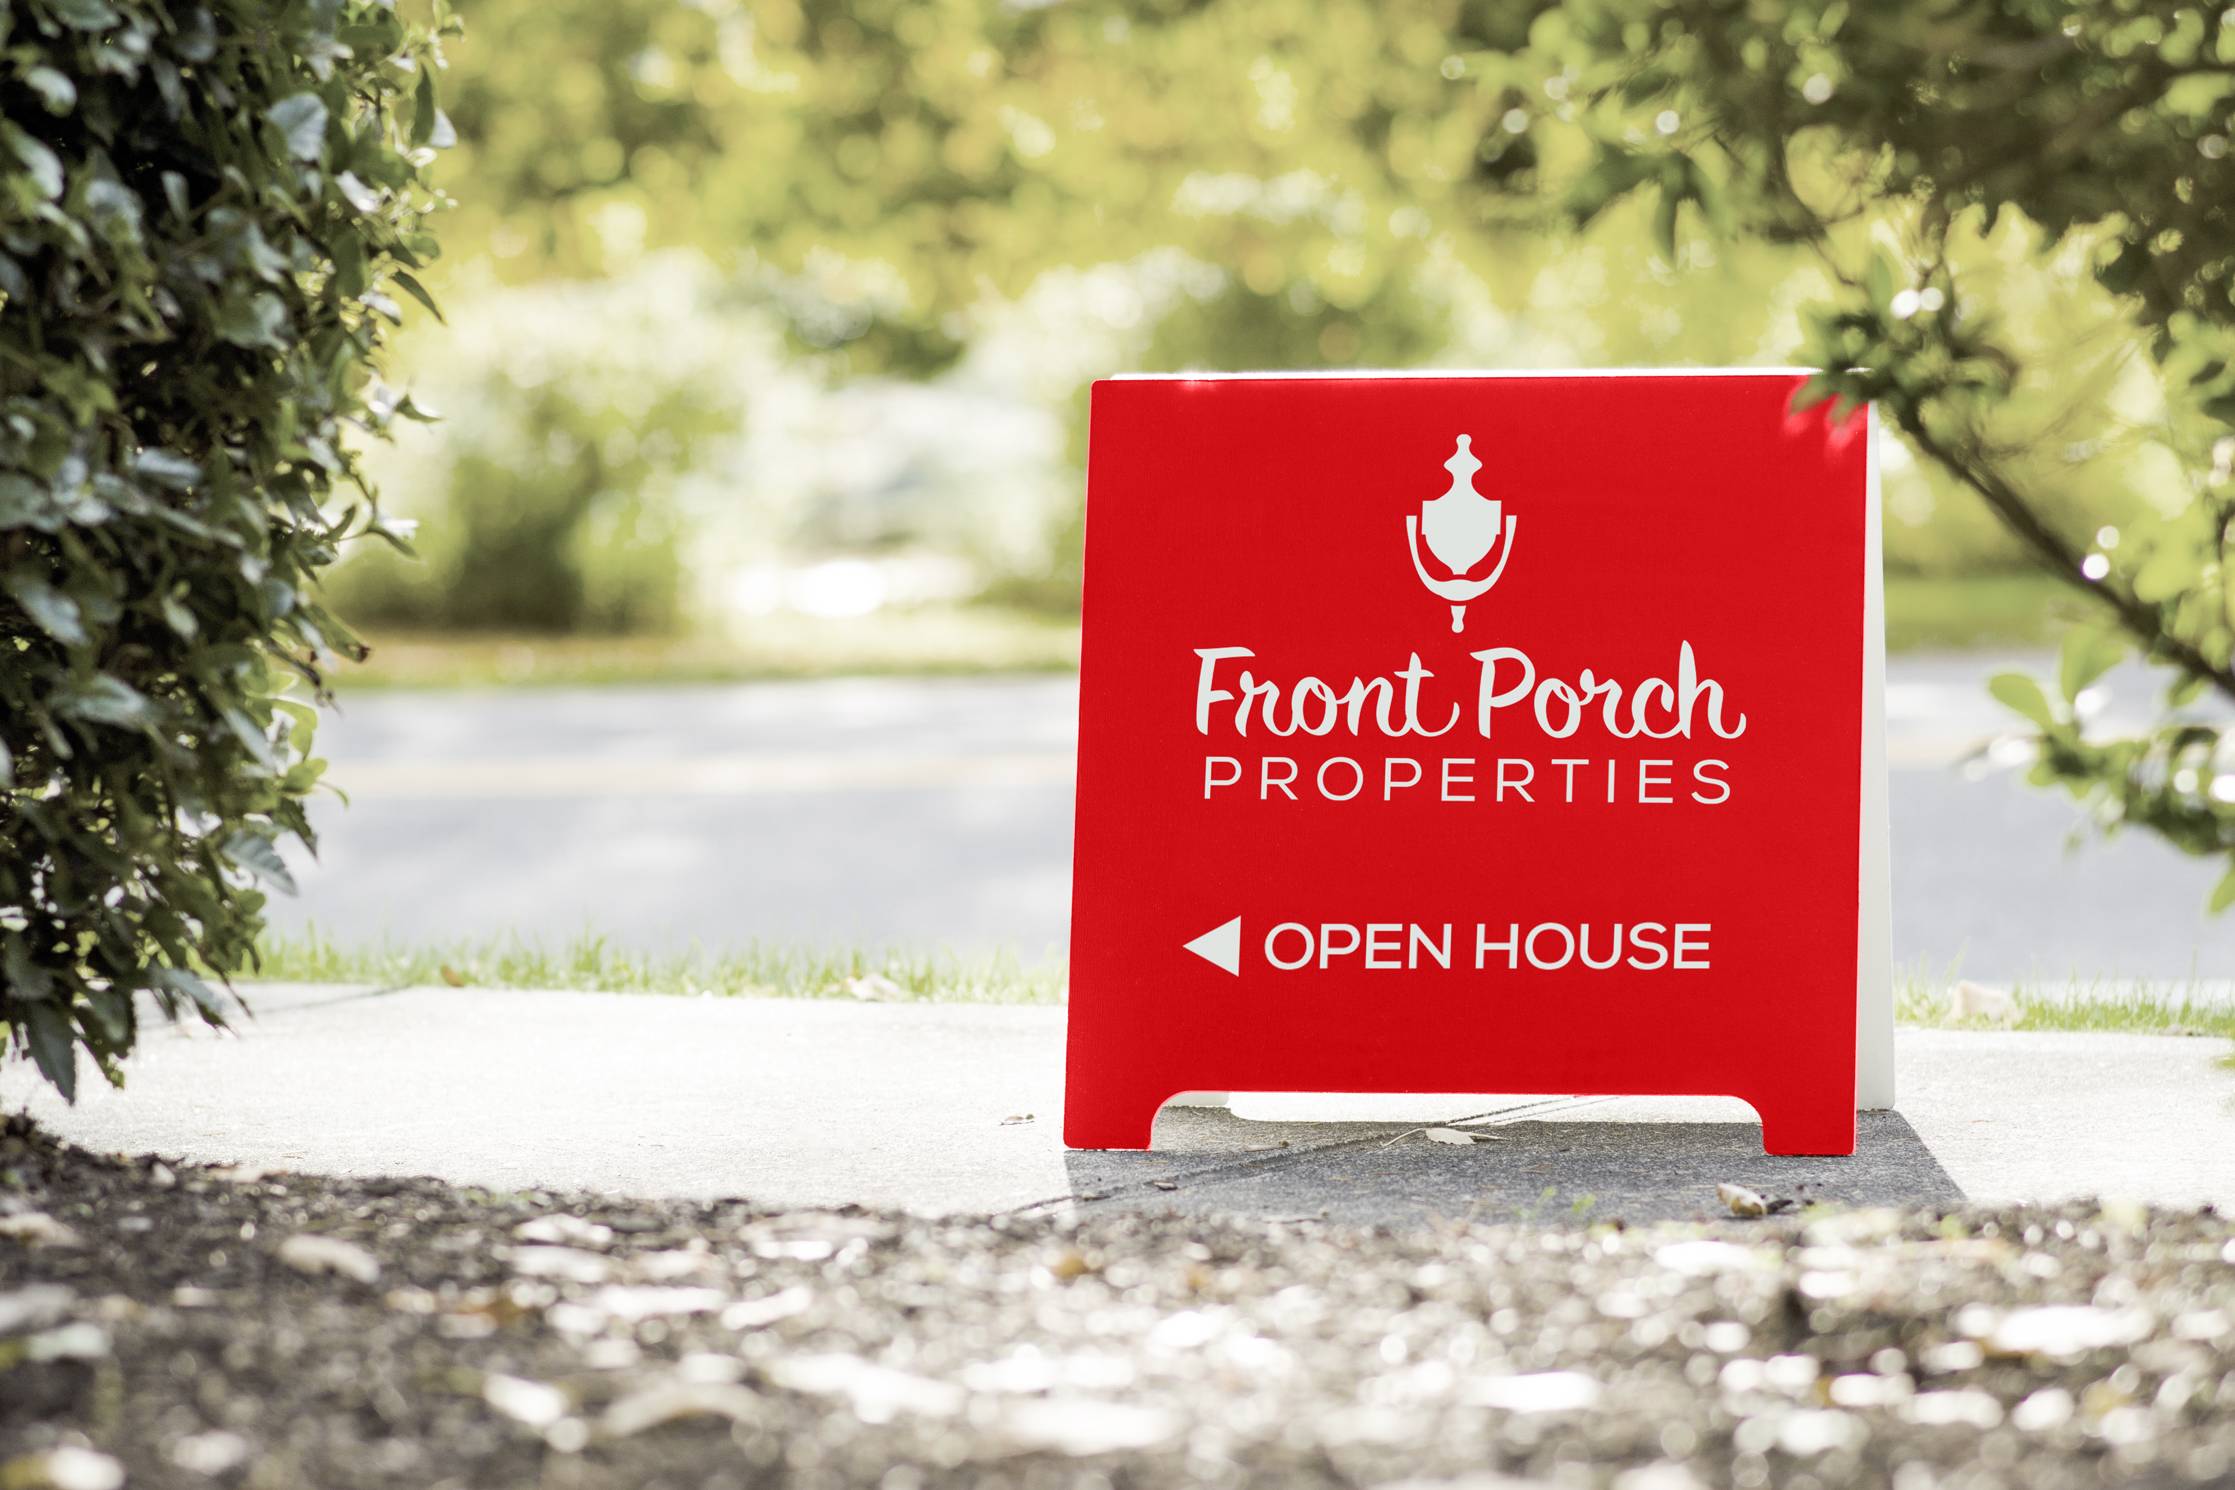 Front Porch Properties logo on a red open house sign